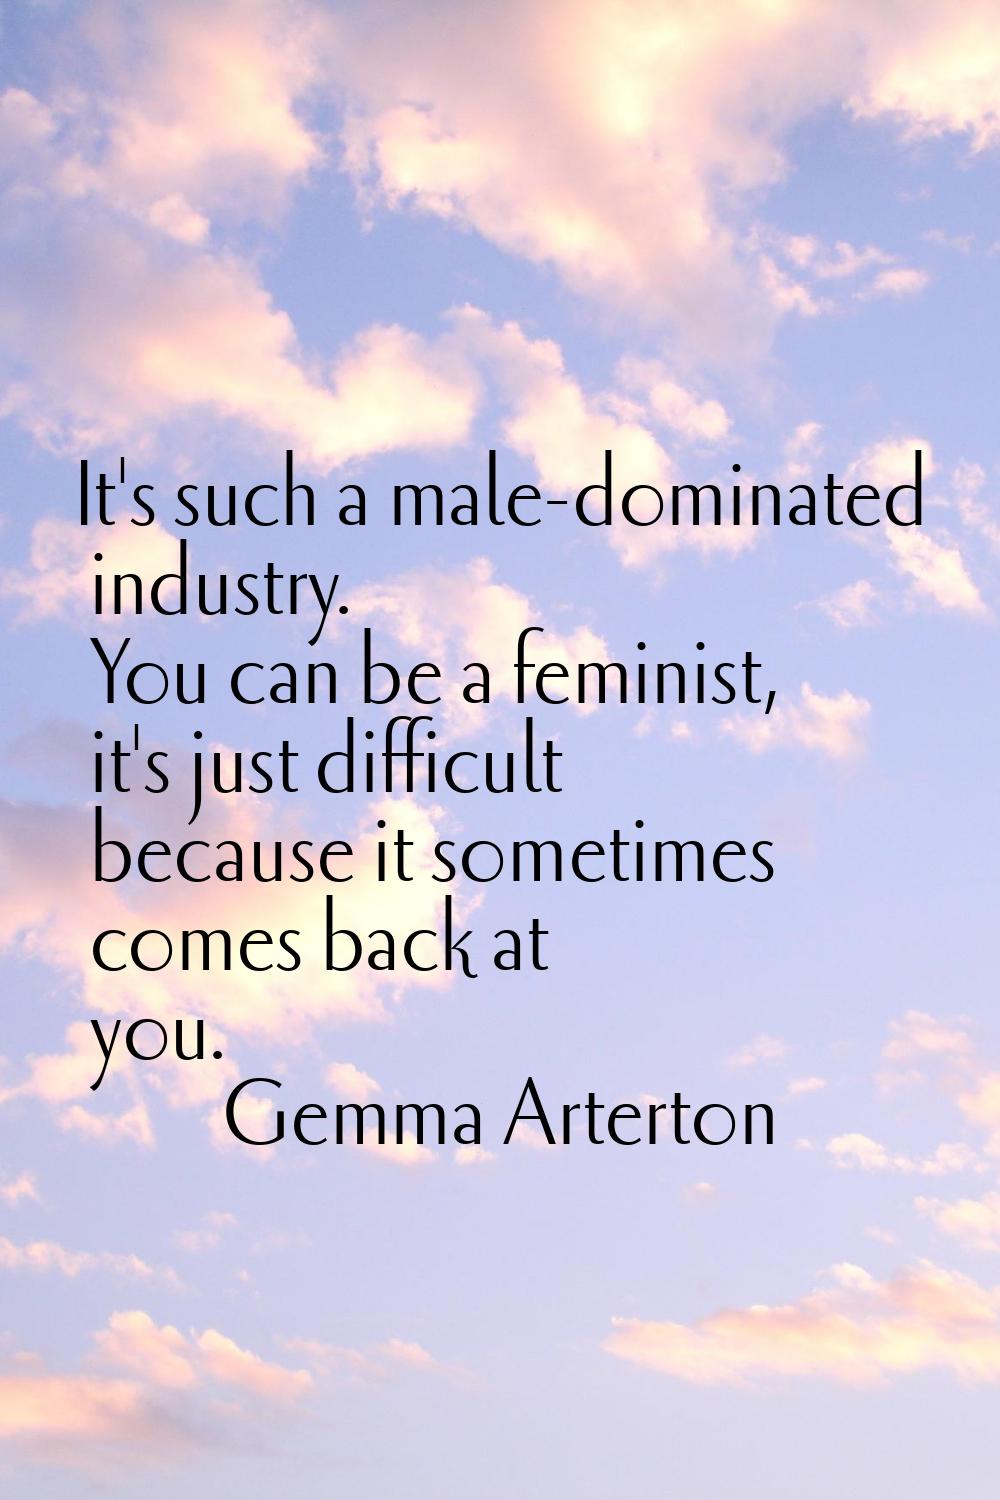 It's such a male-dominated industry. You can be a feminist, it's just difficult because it sometime